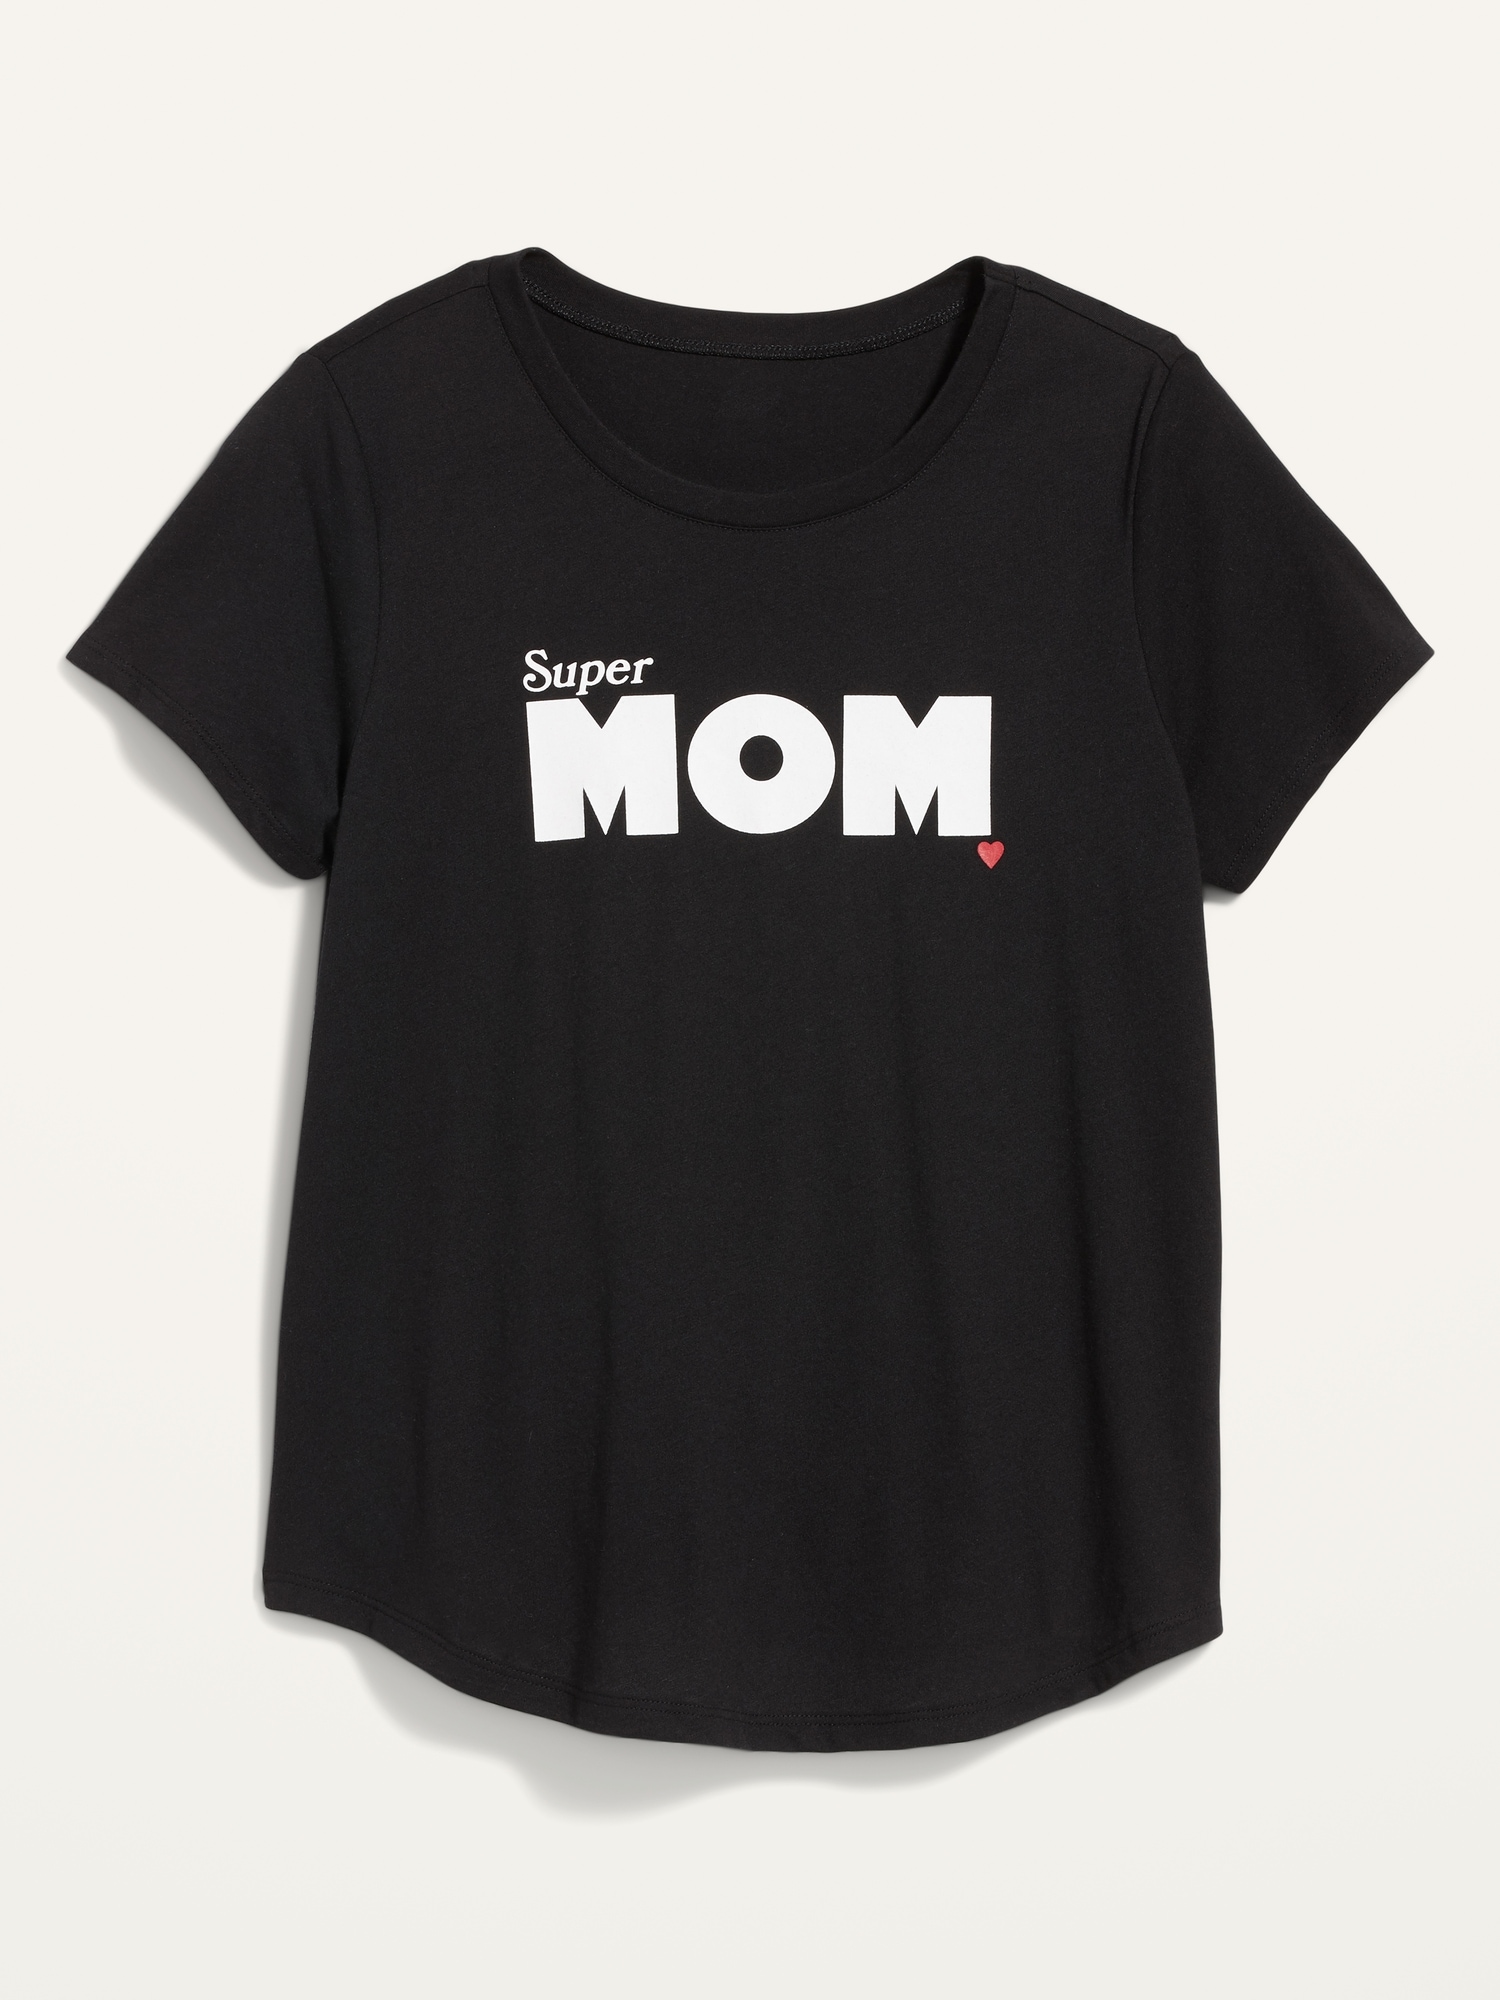 Matching Graphic T-Shirt for Women | Old Navy